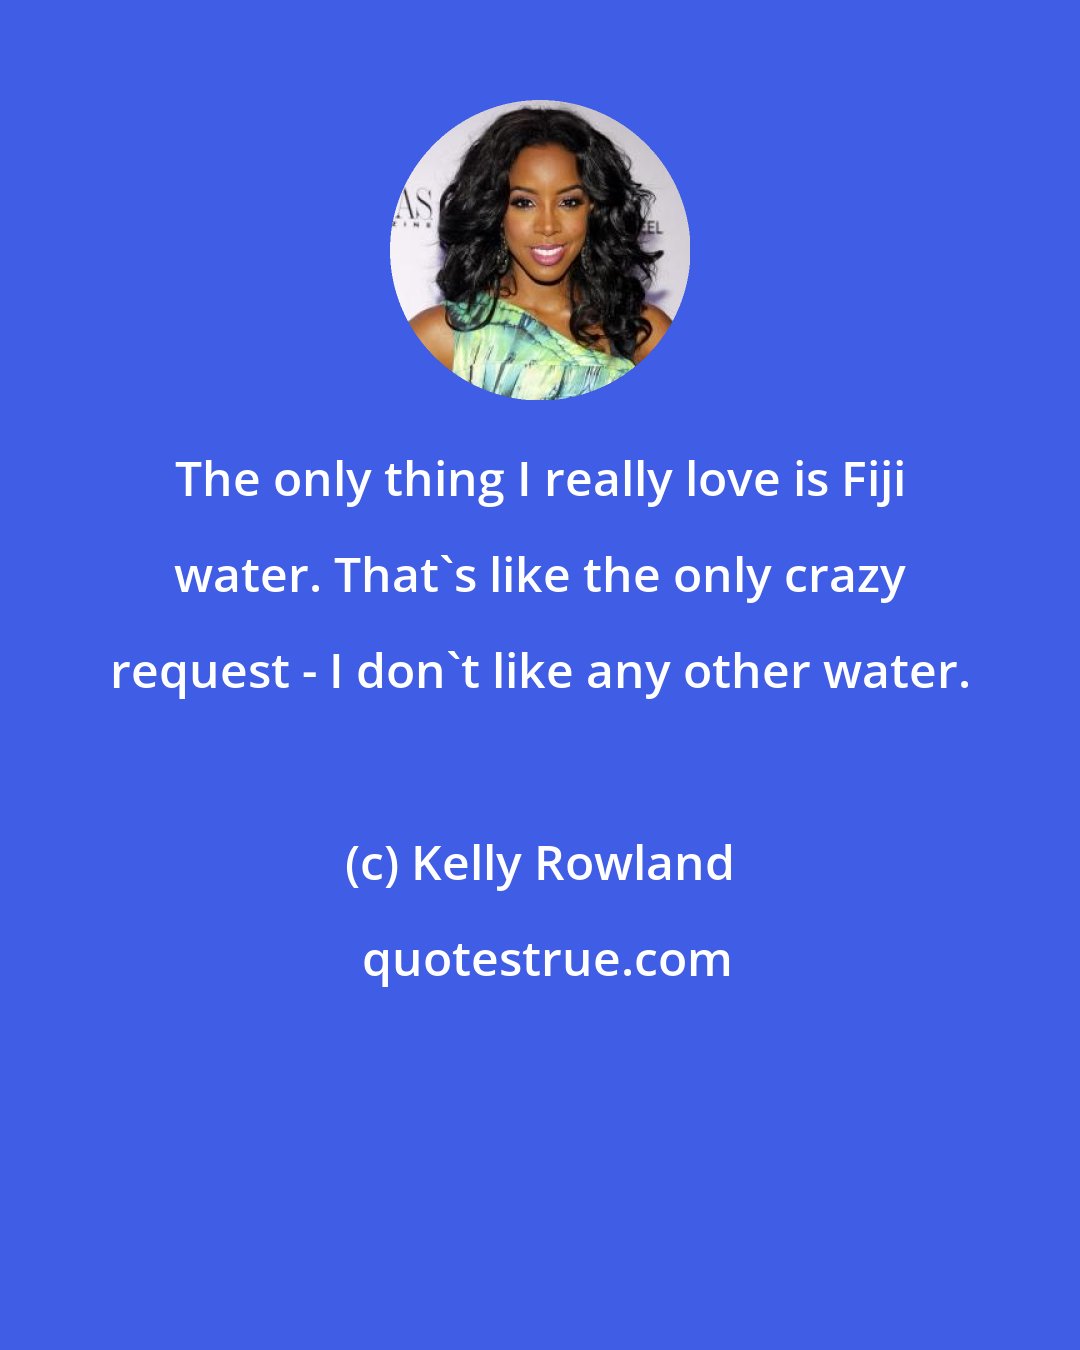 Kelly Rowland: The only thing I really love is Fiji water. That's like the only crazy request - I don't like any other water.